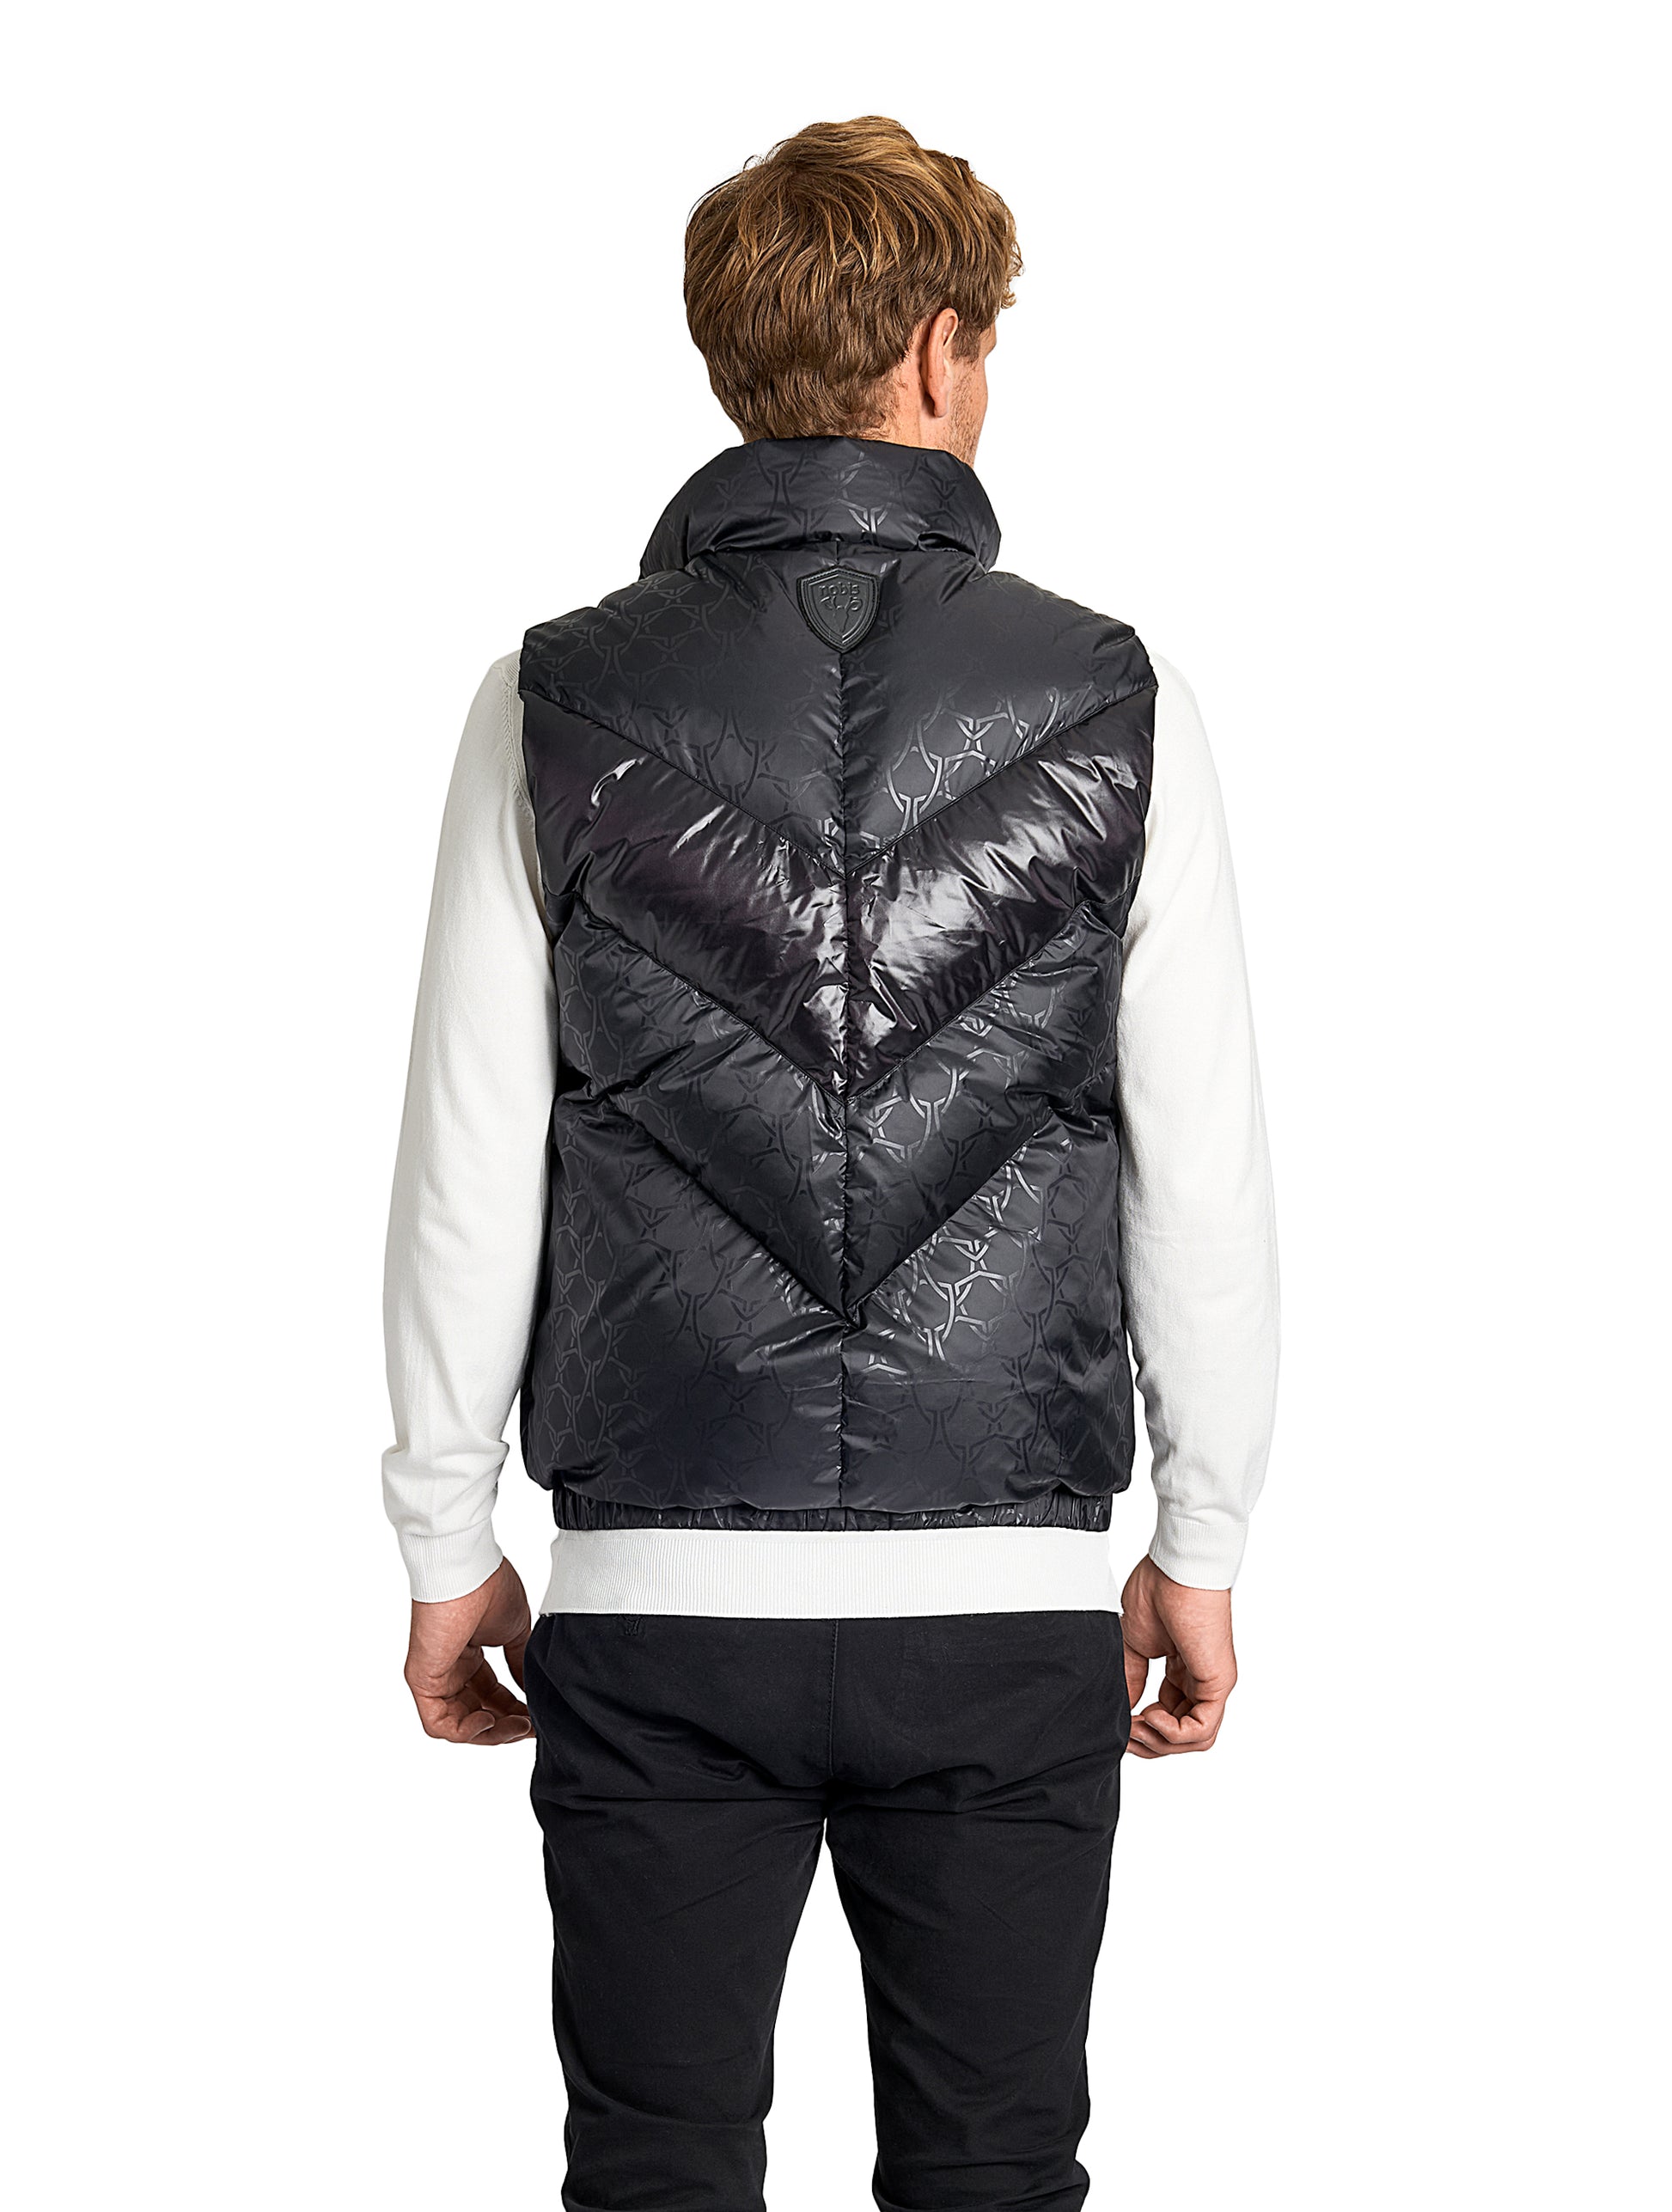 Kylo Men's Chevron Quilted Vest in hip length, premium cire technical nylon taffeta fabrication, Premium Canadian origin White Duck Down insulation, two-way centre-front zipper, fleece-lined pockets at waist, elasticized waistband, in Shield Monogram